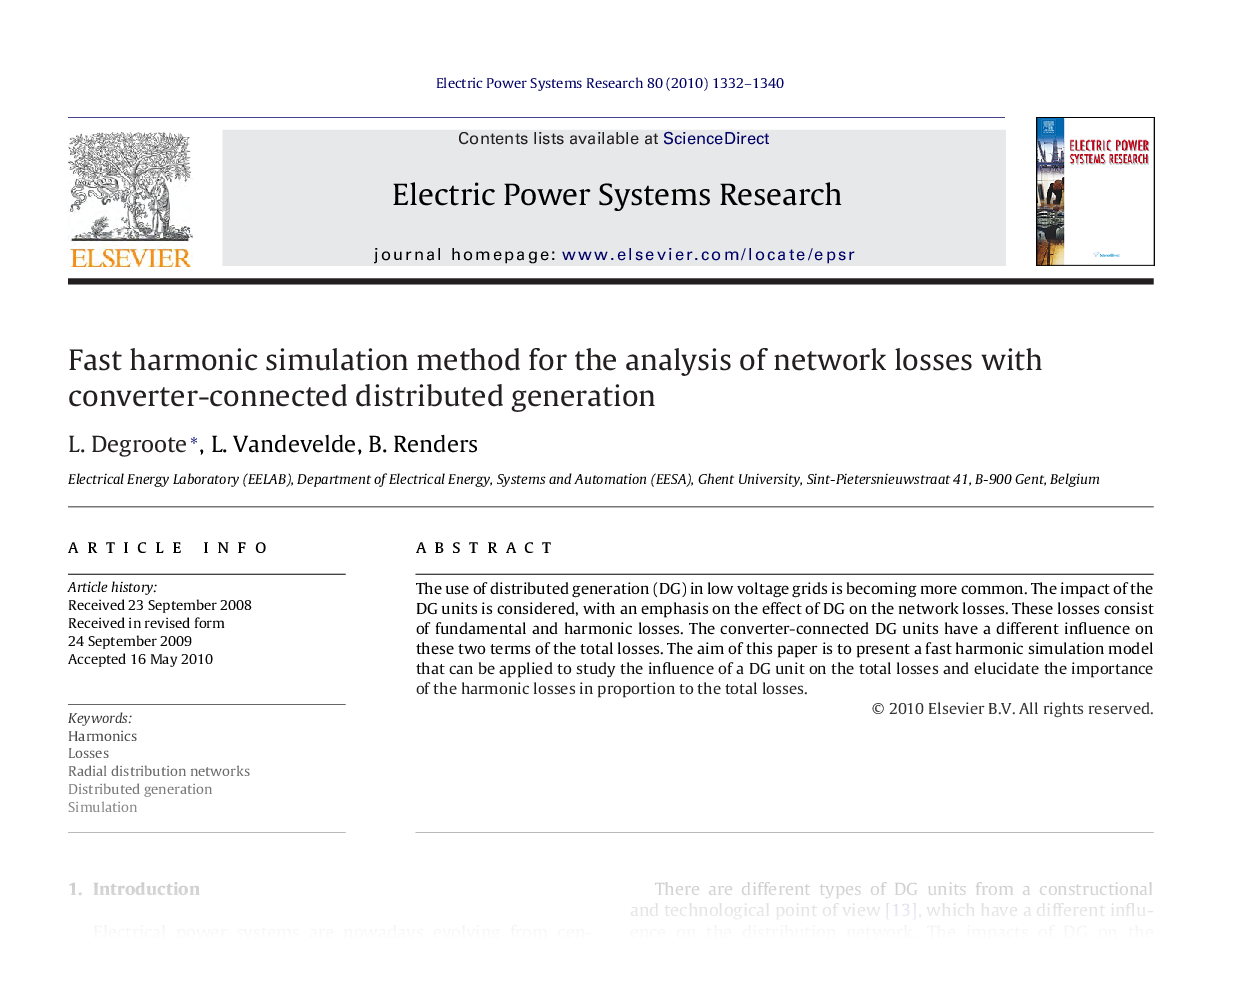 Fast Harmonic Simulation Method for the Analysis of Network Losses with Converter-Connected Distributed Generation